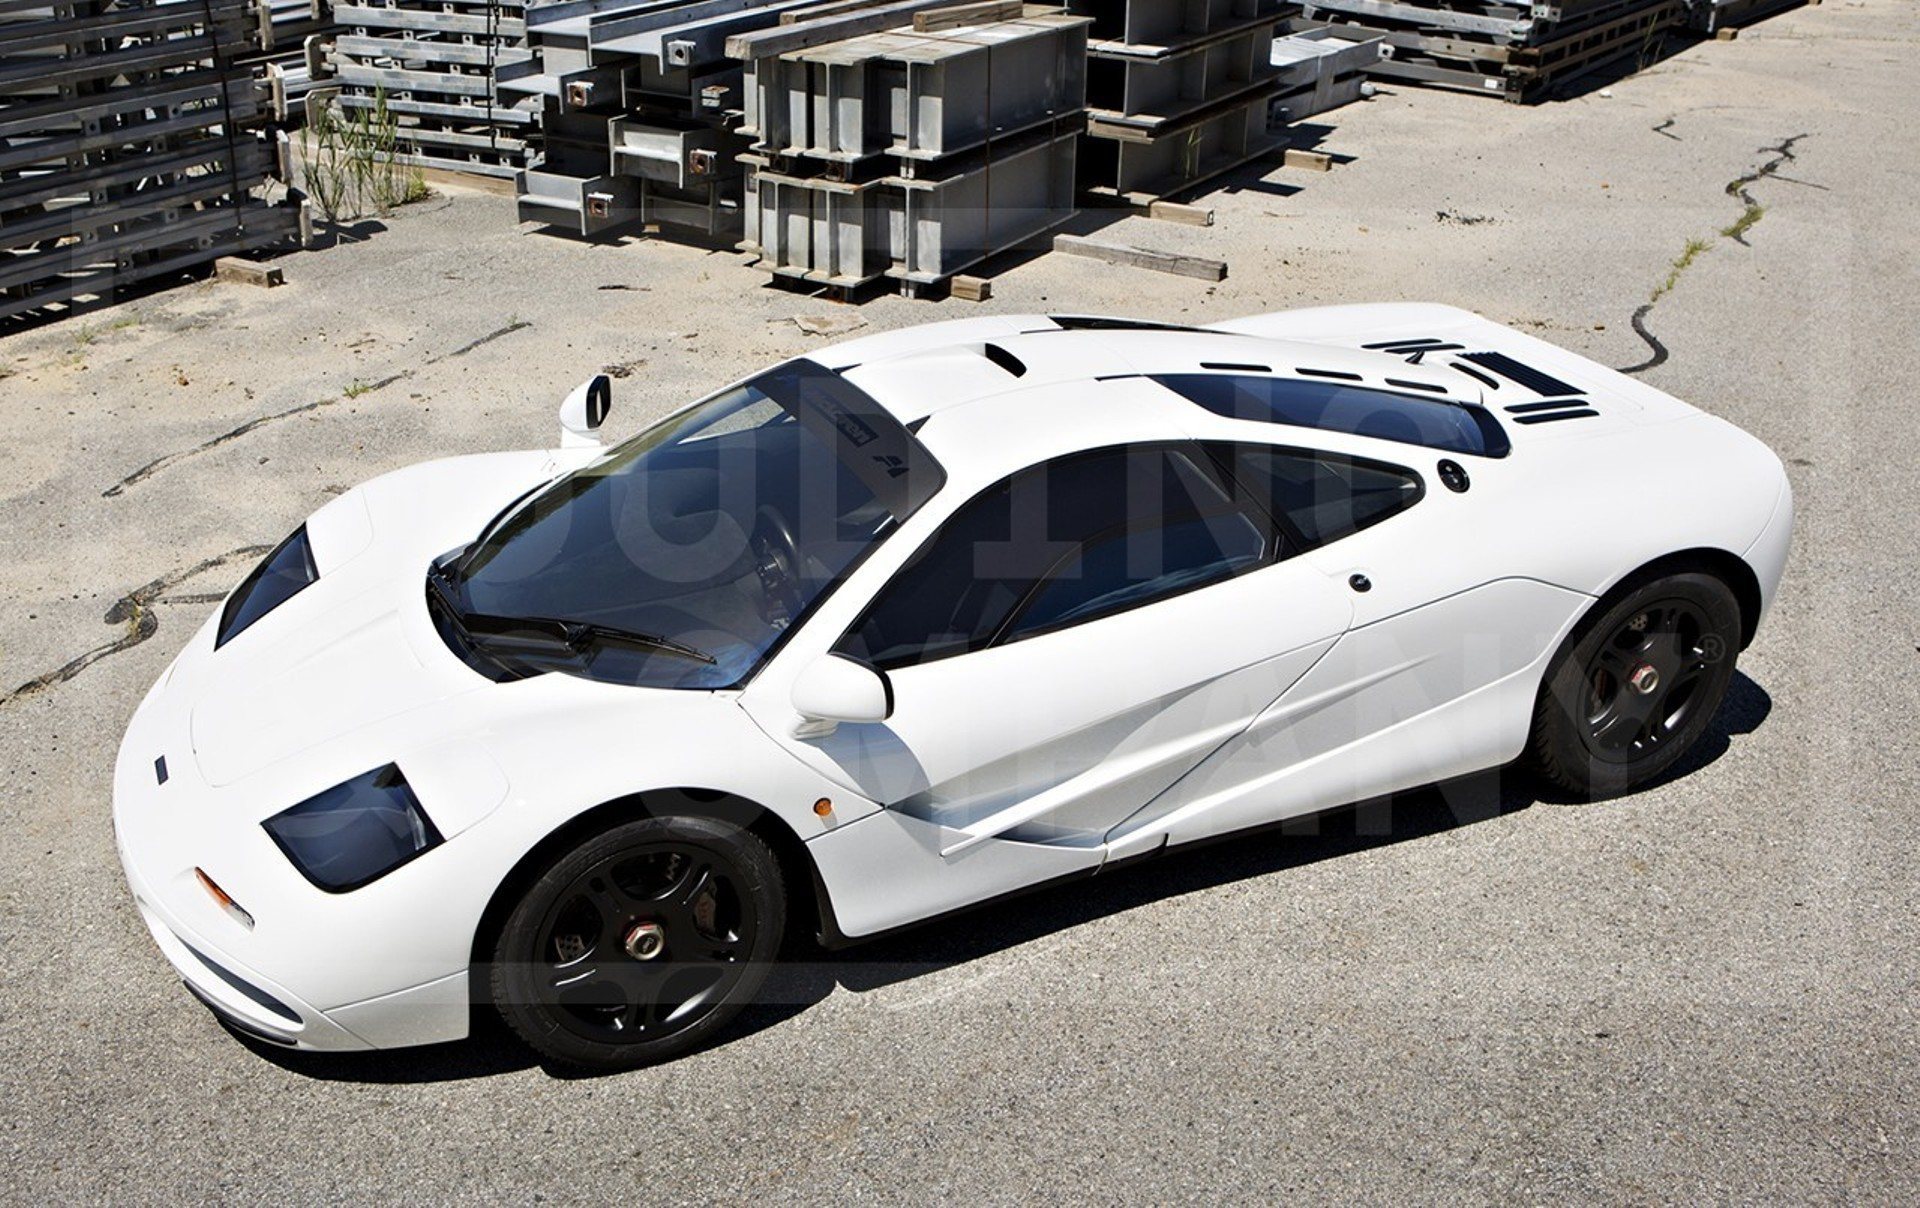 Gooding Pebble Beach 2014 Preview - 1995 McLaren F1 - The Only White F1 Ever Made ...